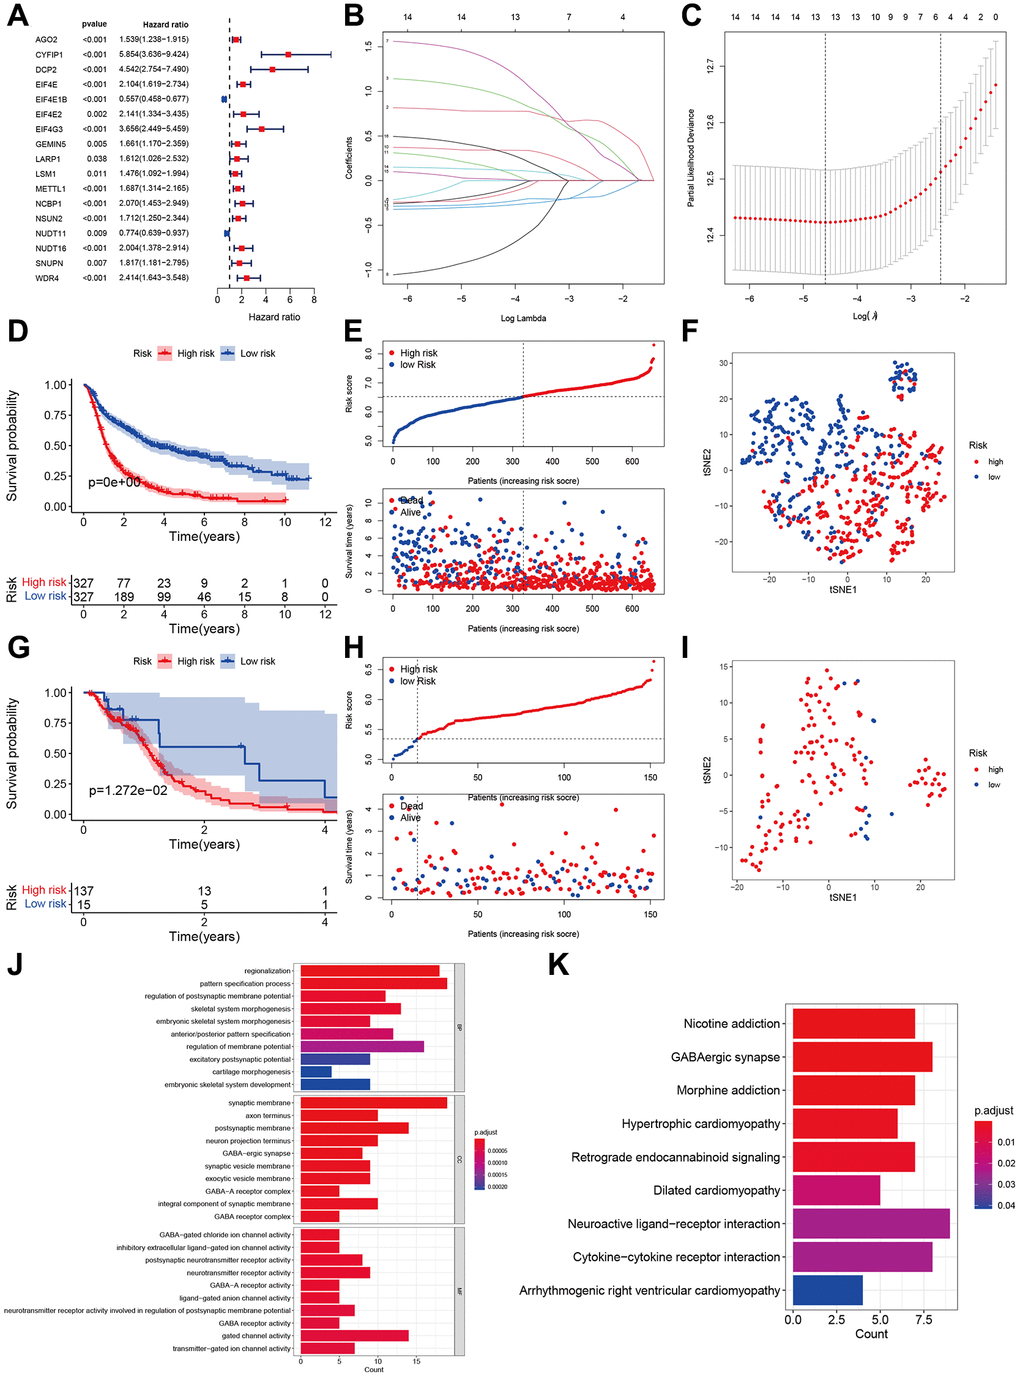 Development and validation of m7G regulator-based prognostic signatures. (A) Forest plot of univariate cox regression in CGGA. (B, C) Parameter selection tuning by cross-validation using LASSO regression. (D, E) Kaplan-Meier curves of risk groups and distribution of risk score and patients in CGGA. (F) Display of two components by PCA in CGGA. (G) Kaplan-Meier curves of two risk groups and distribution of risk score and patients in TCGA. (H, I) Display of two components by PCA in TCGA. (J, K) GO and KEGG enrichment analyses based on 440 DEGs between high- and low-risk groups.